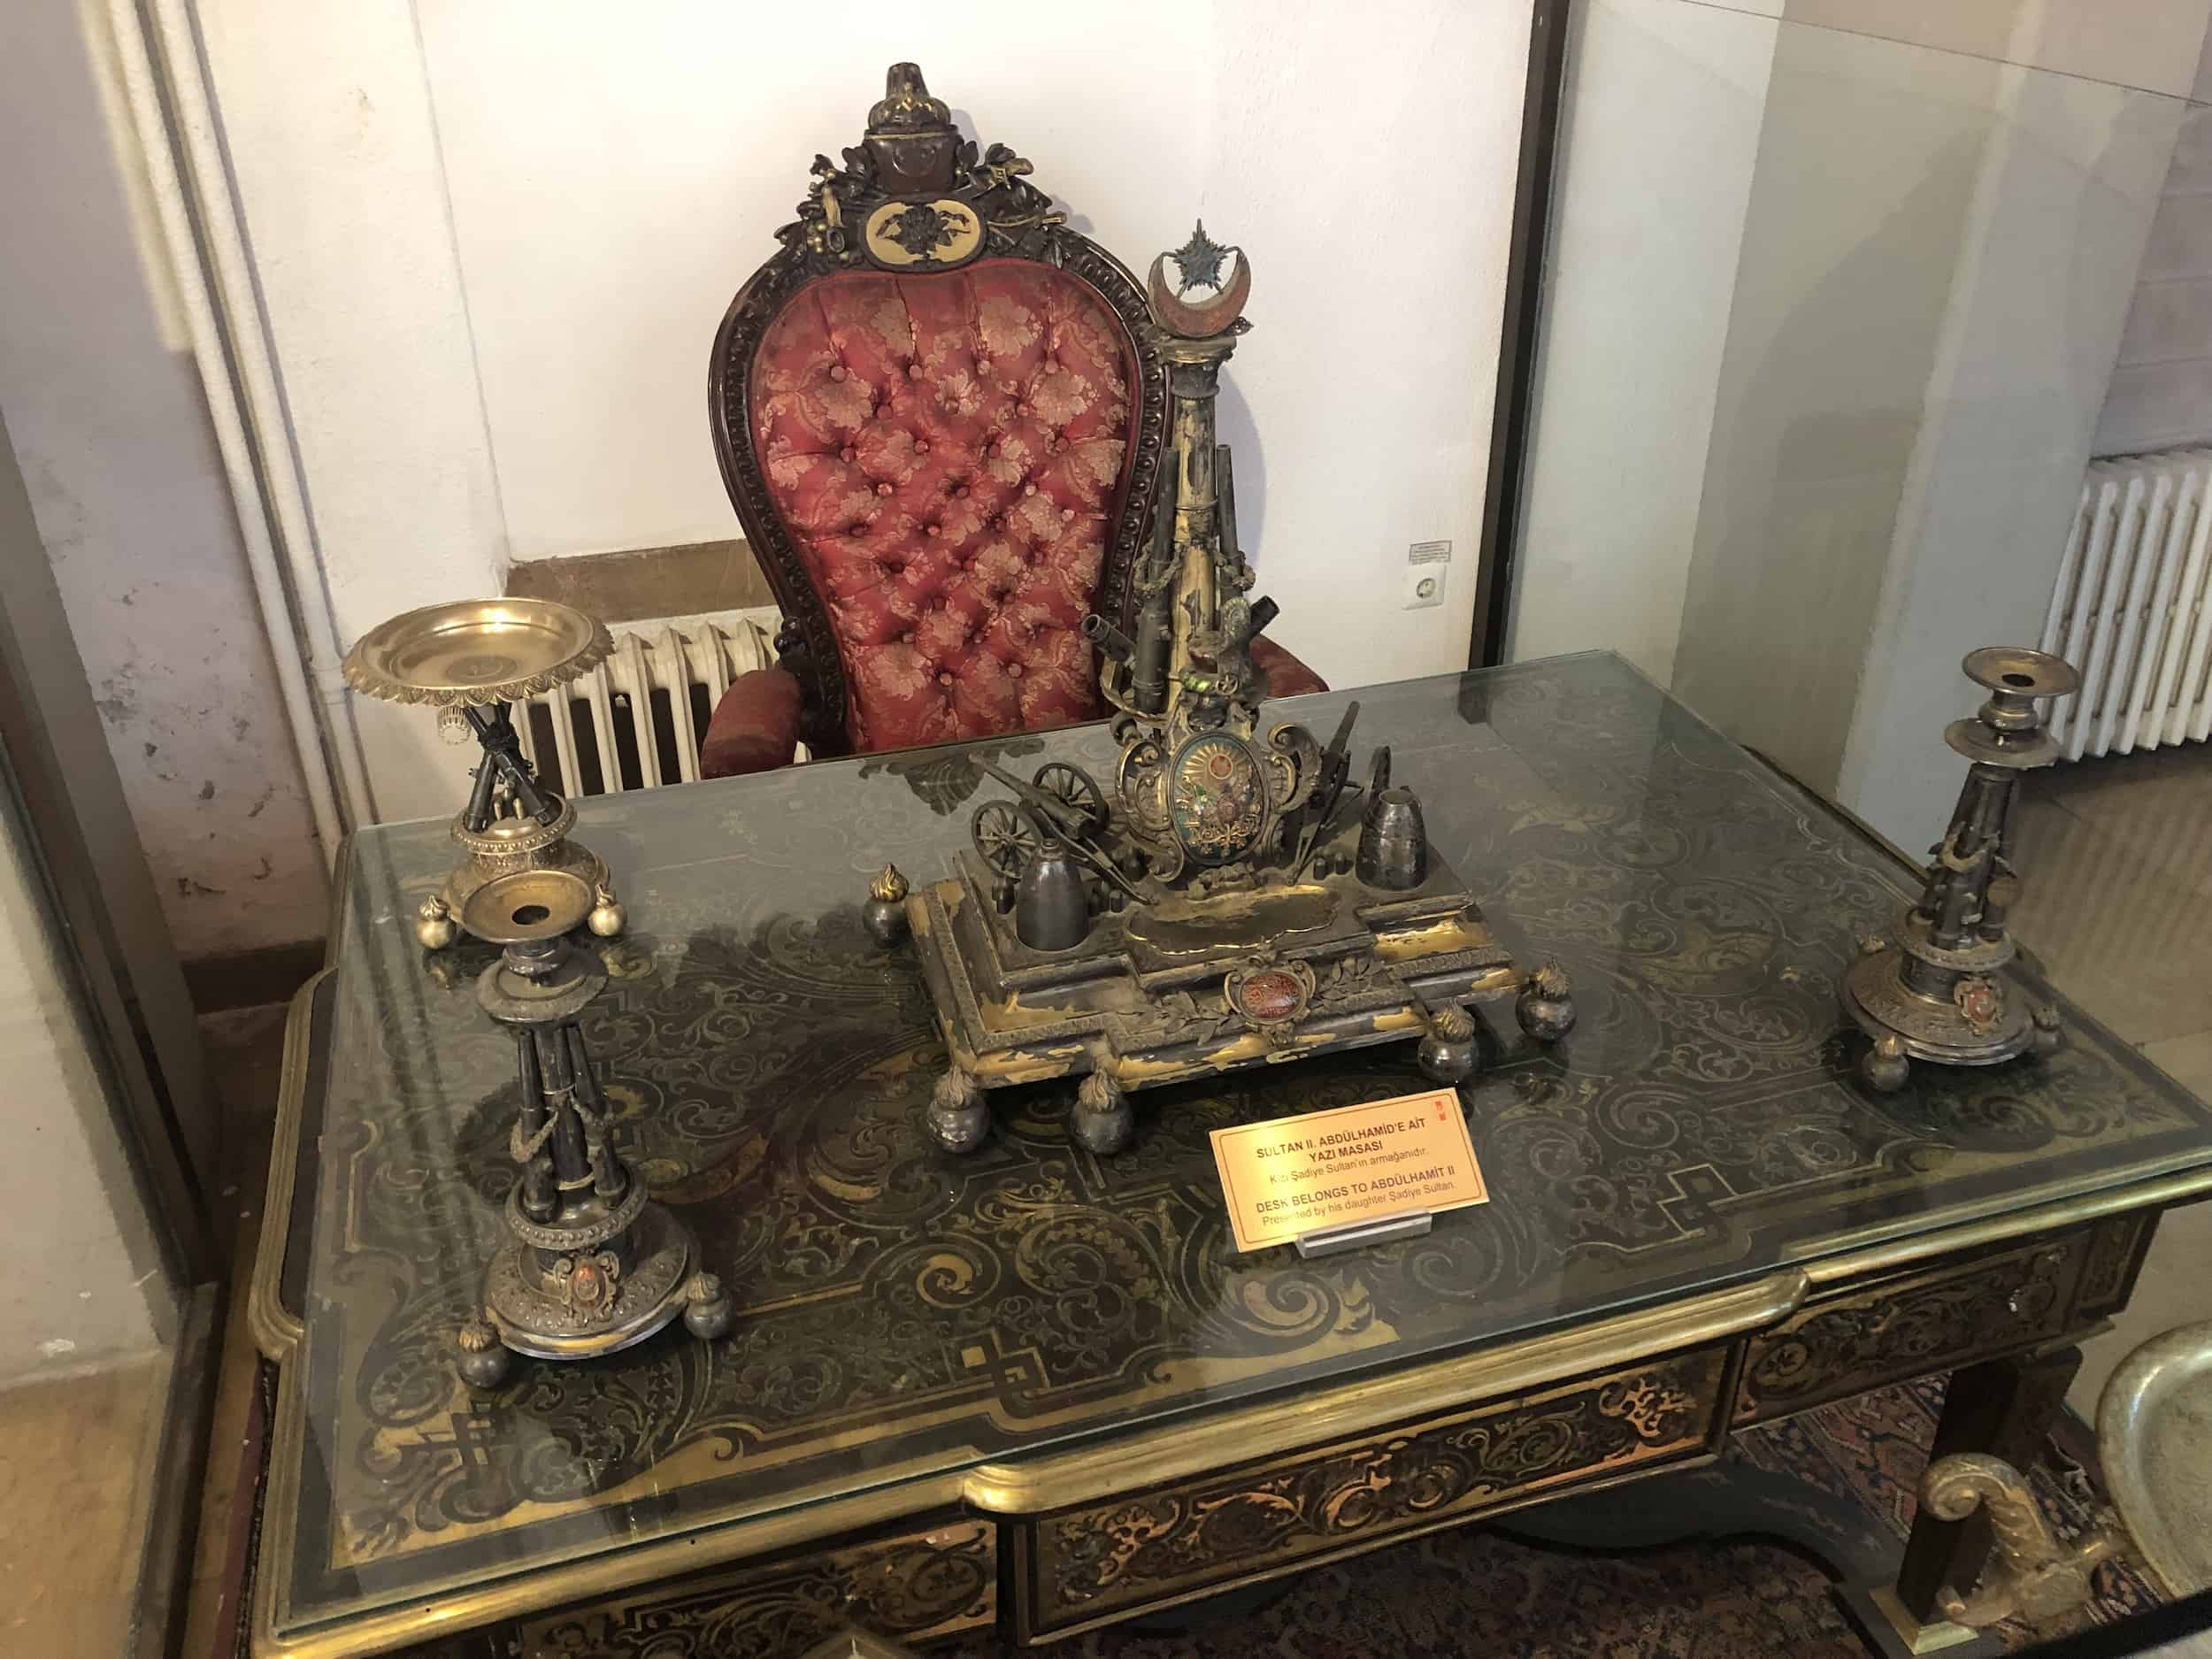 Desk belonging to Sultan Abdülhamid II in the Constitutional Period Hall at the Harbiye Military Museum in Istanbul, Turkey